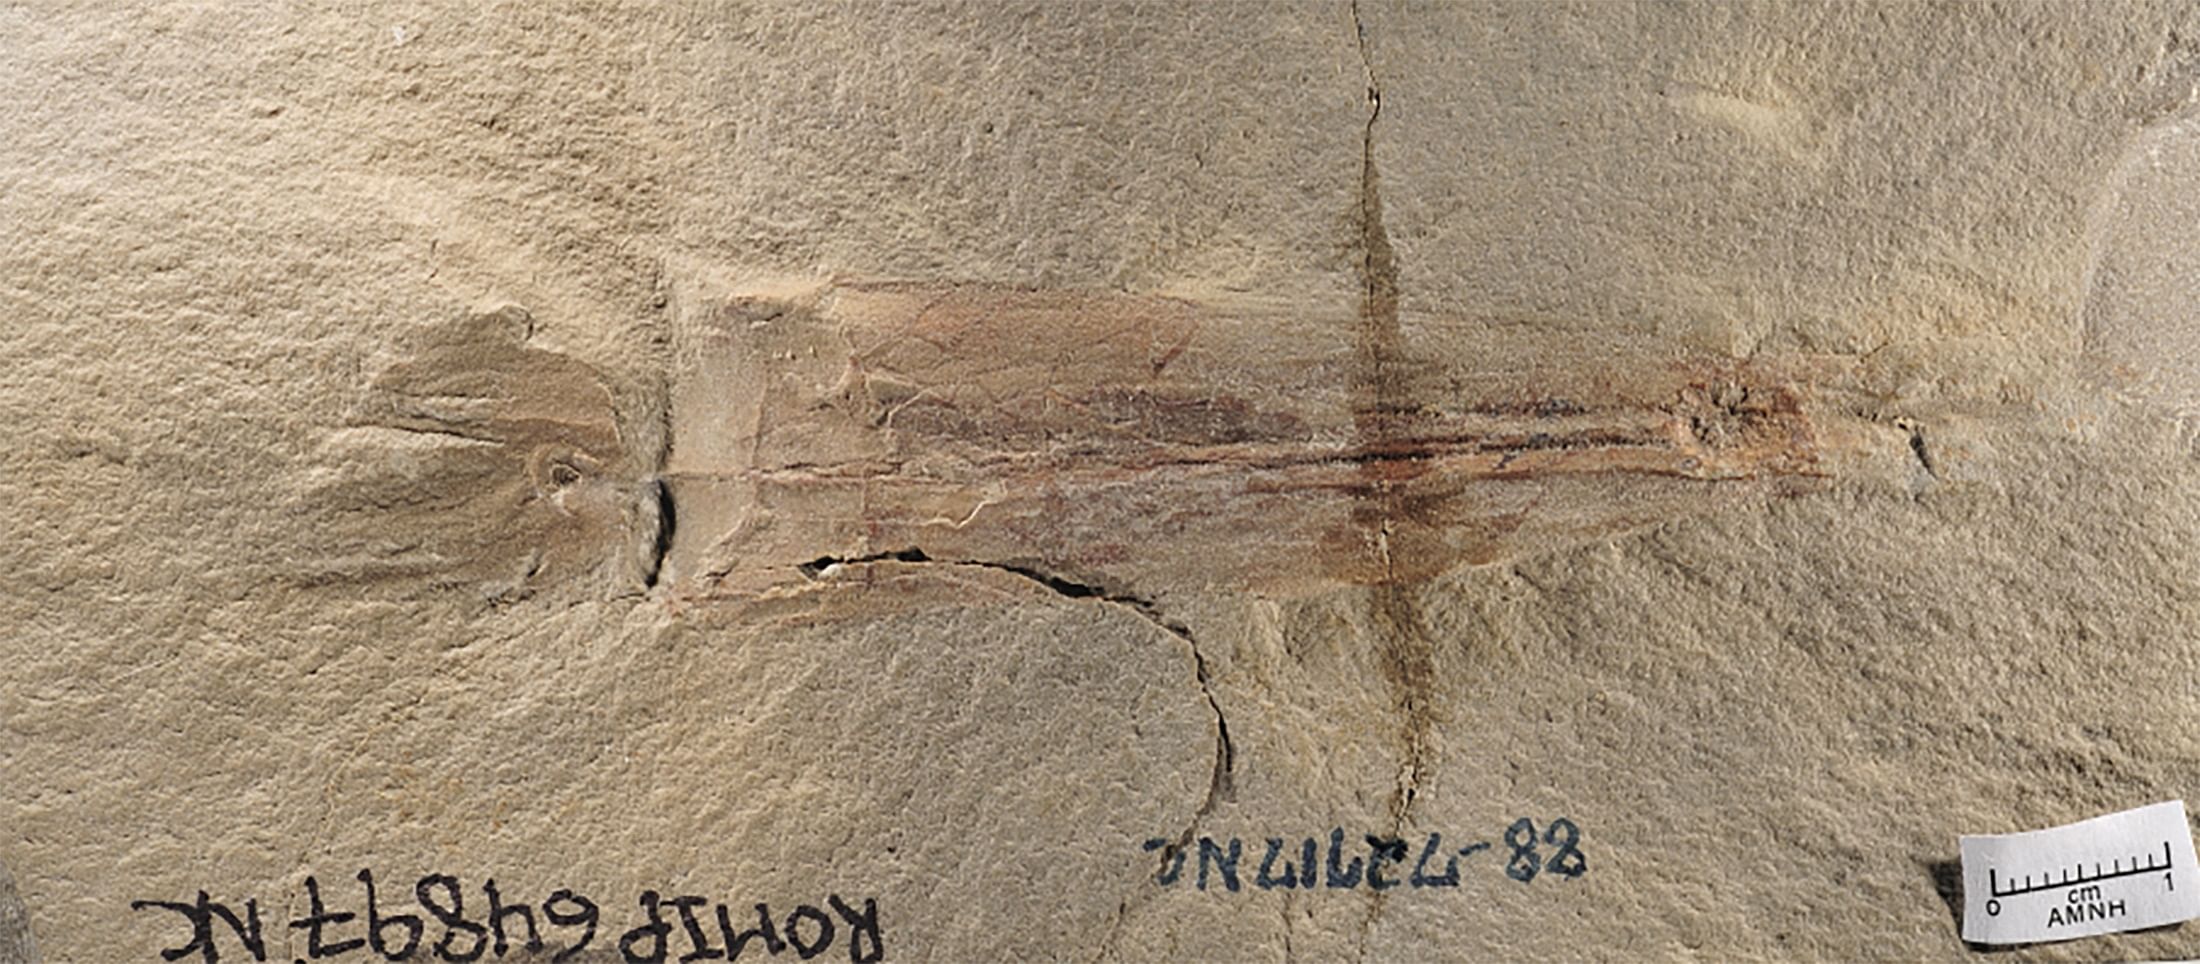 A fossil of the cephalopod species Syllipsimopodi bideni - the oldest-known relative of today's octopuses - discovered in Montana and dating to 328 million years ago during the Carboniferous Period. Credit: Thurston/Handout via Reuters